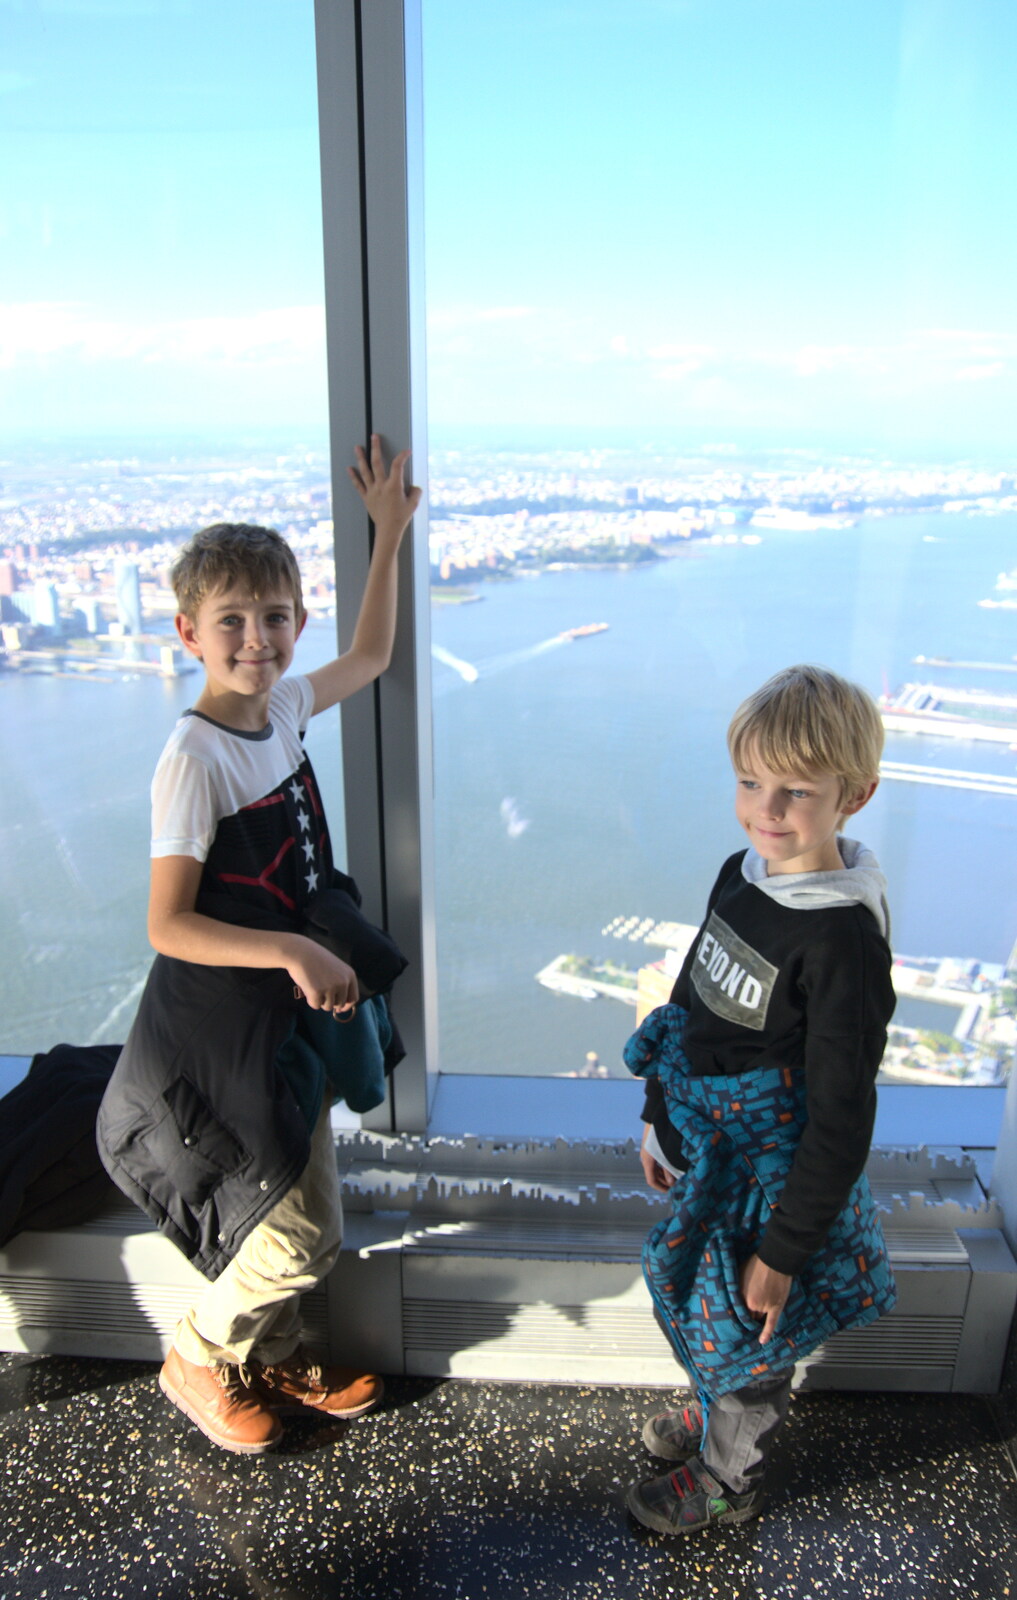 The boys at the top of the tower from The Liberty Cruise and One World Trade Center, New York, United States - 23rd October 2018